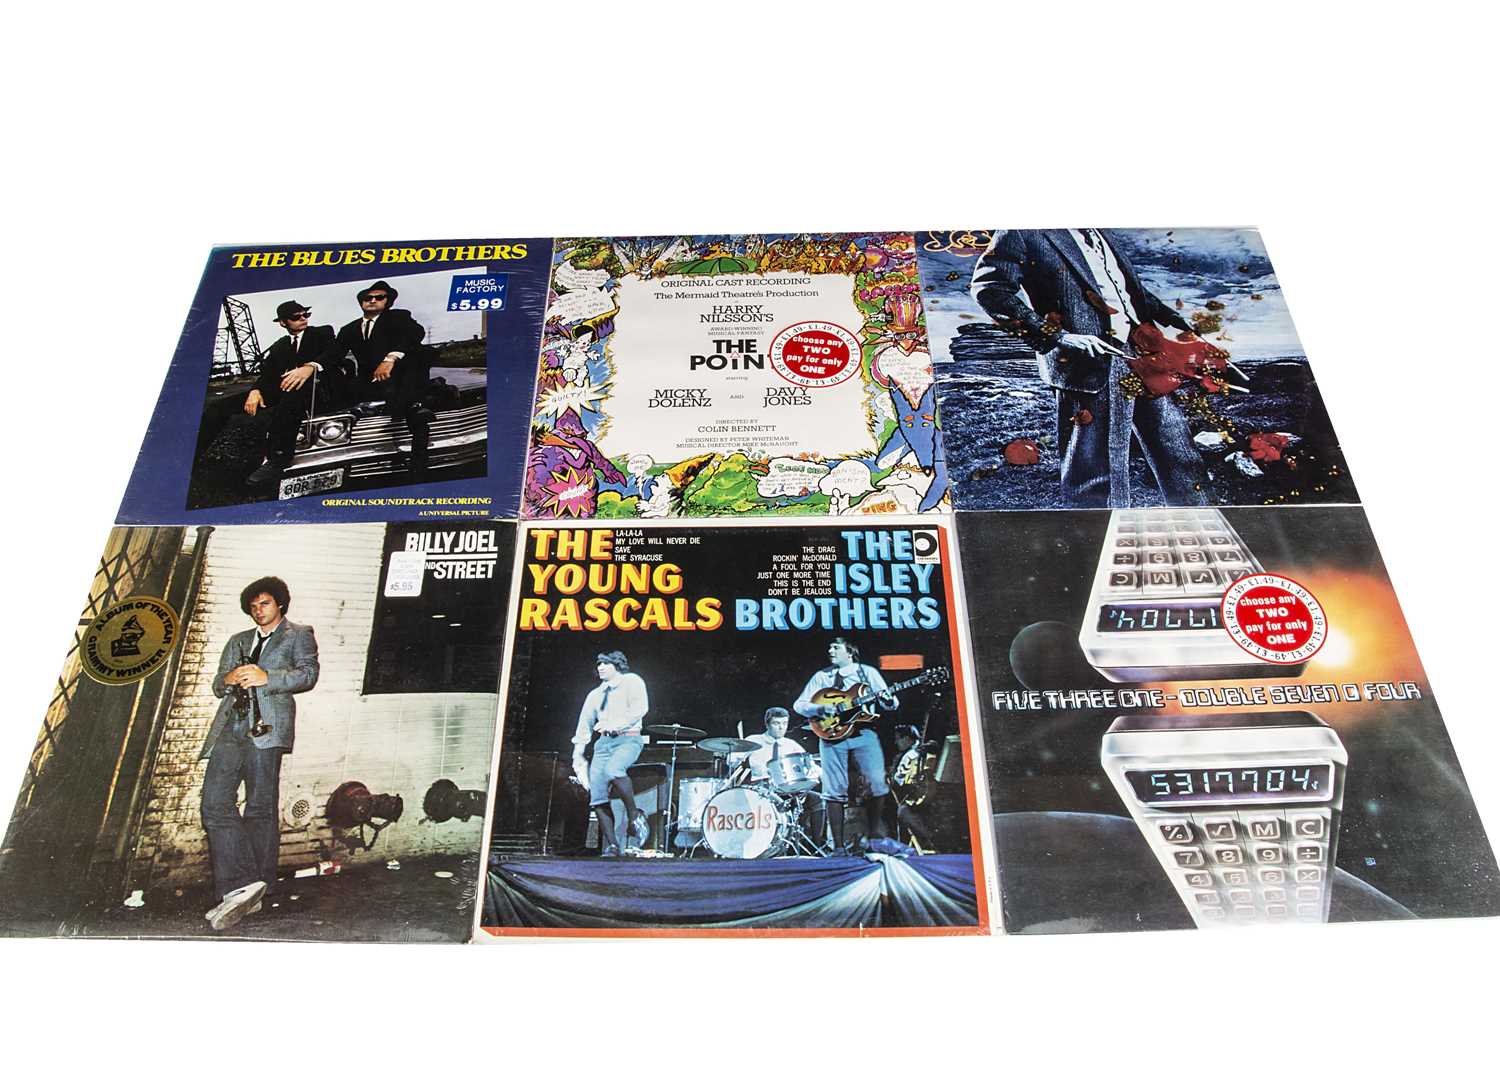 Lot 59 - Sealed LPs